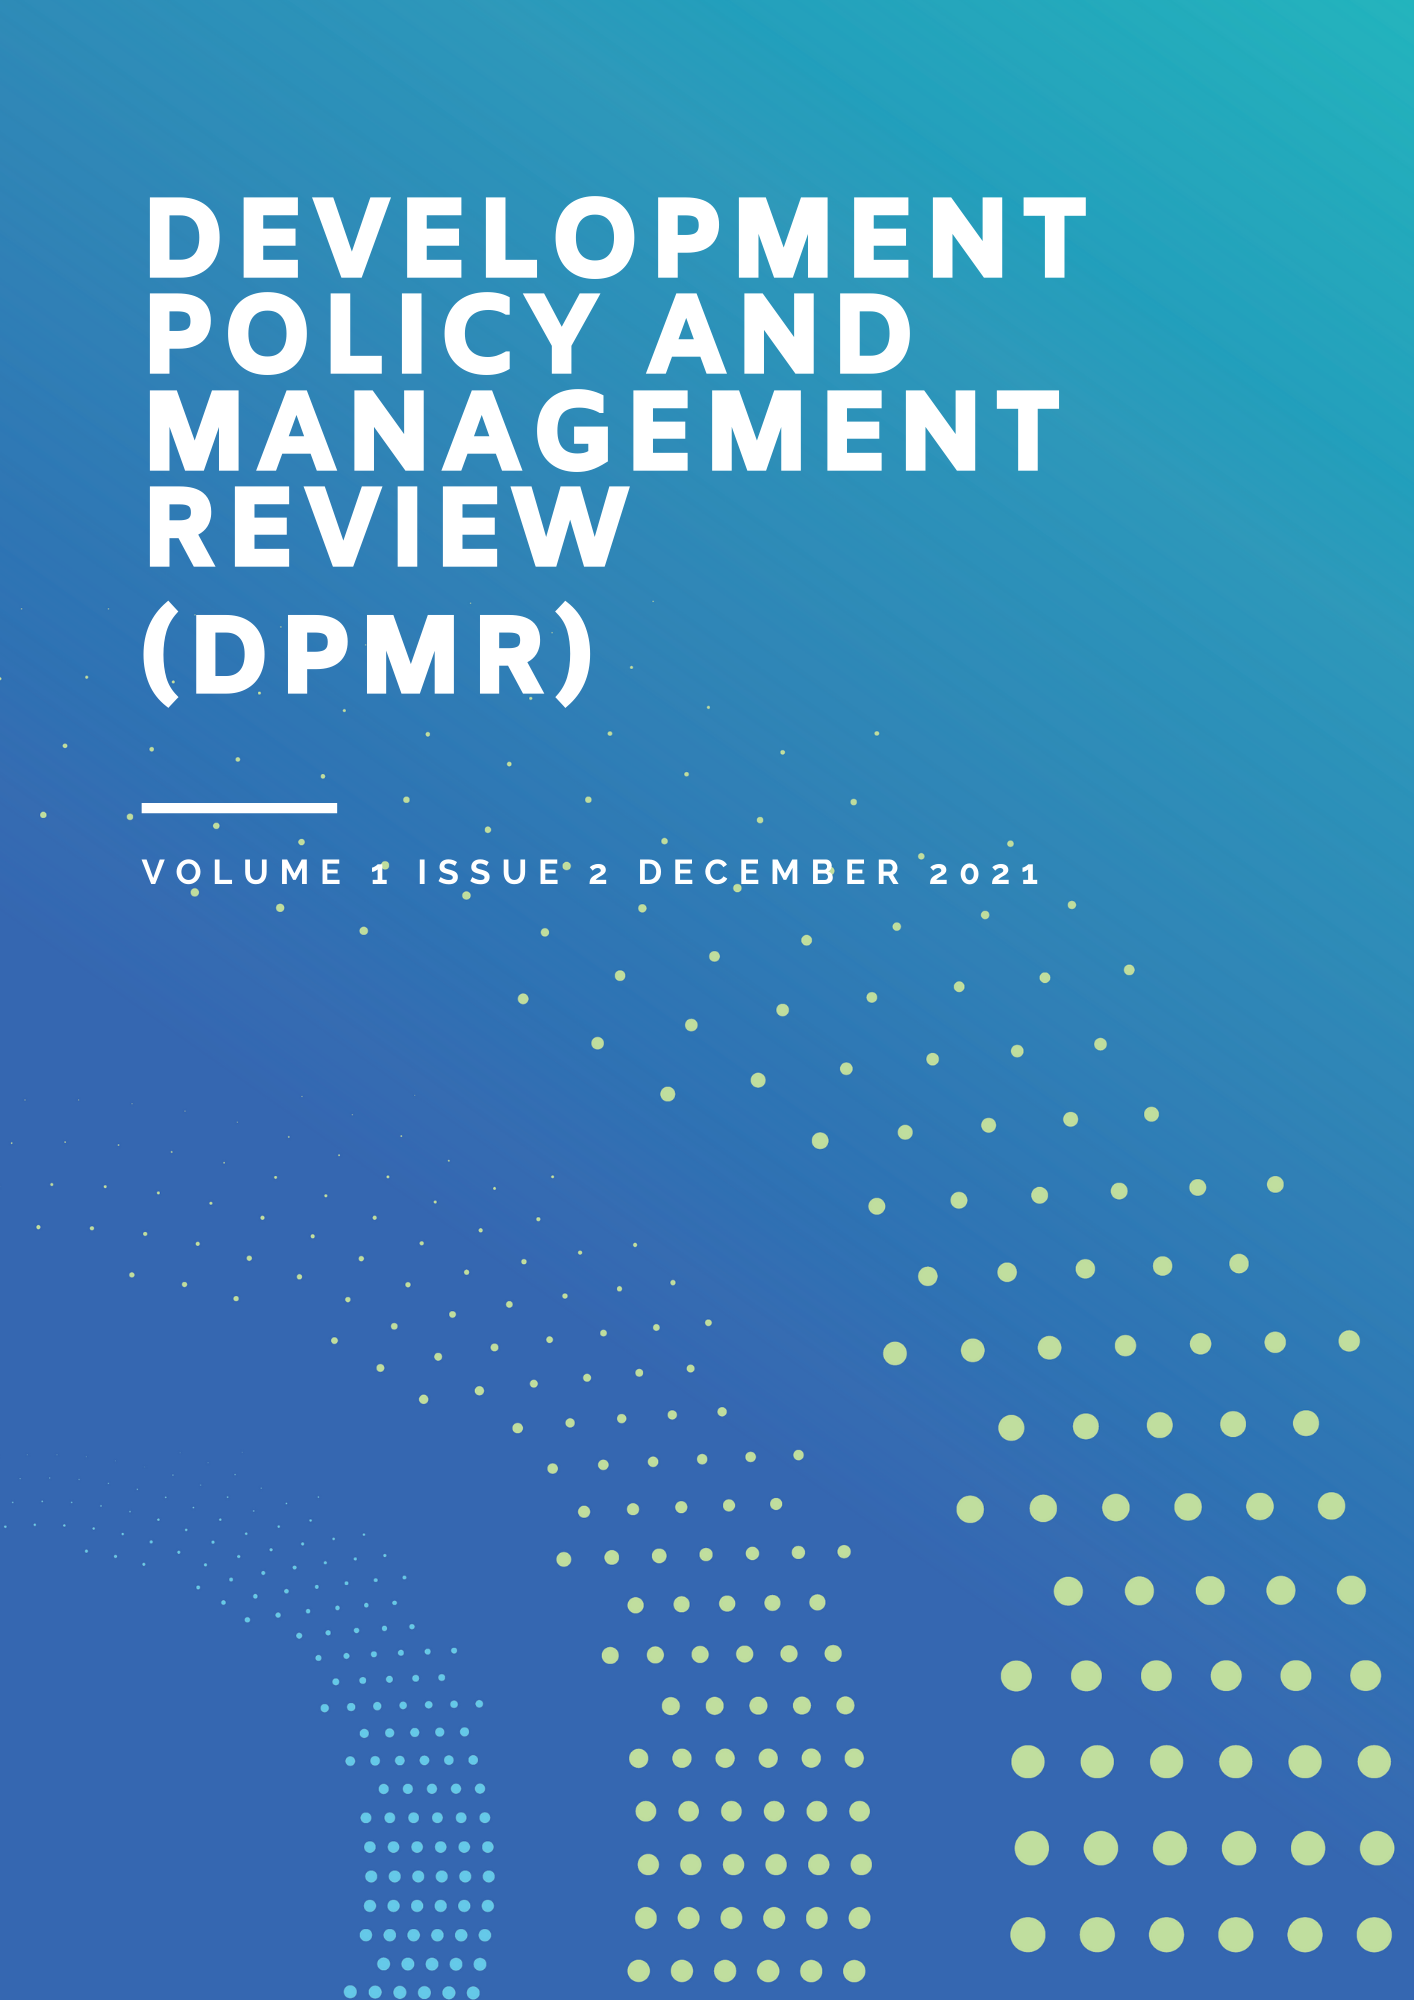 DEVELOPMENT POLICY AND MANAGEMENT REVIEW (DPMR)